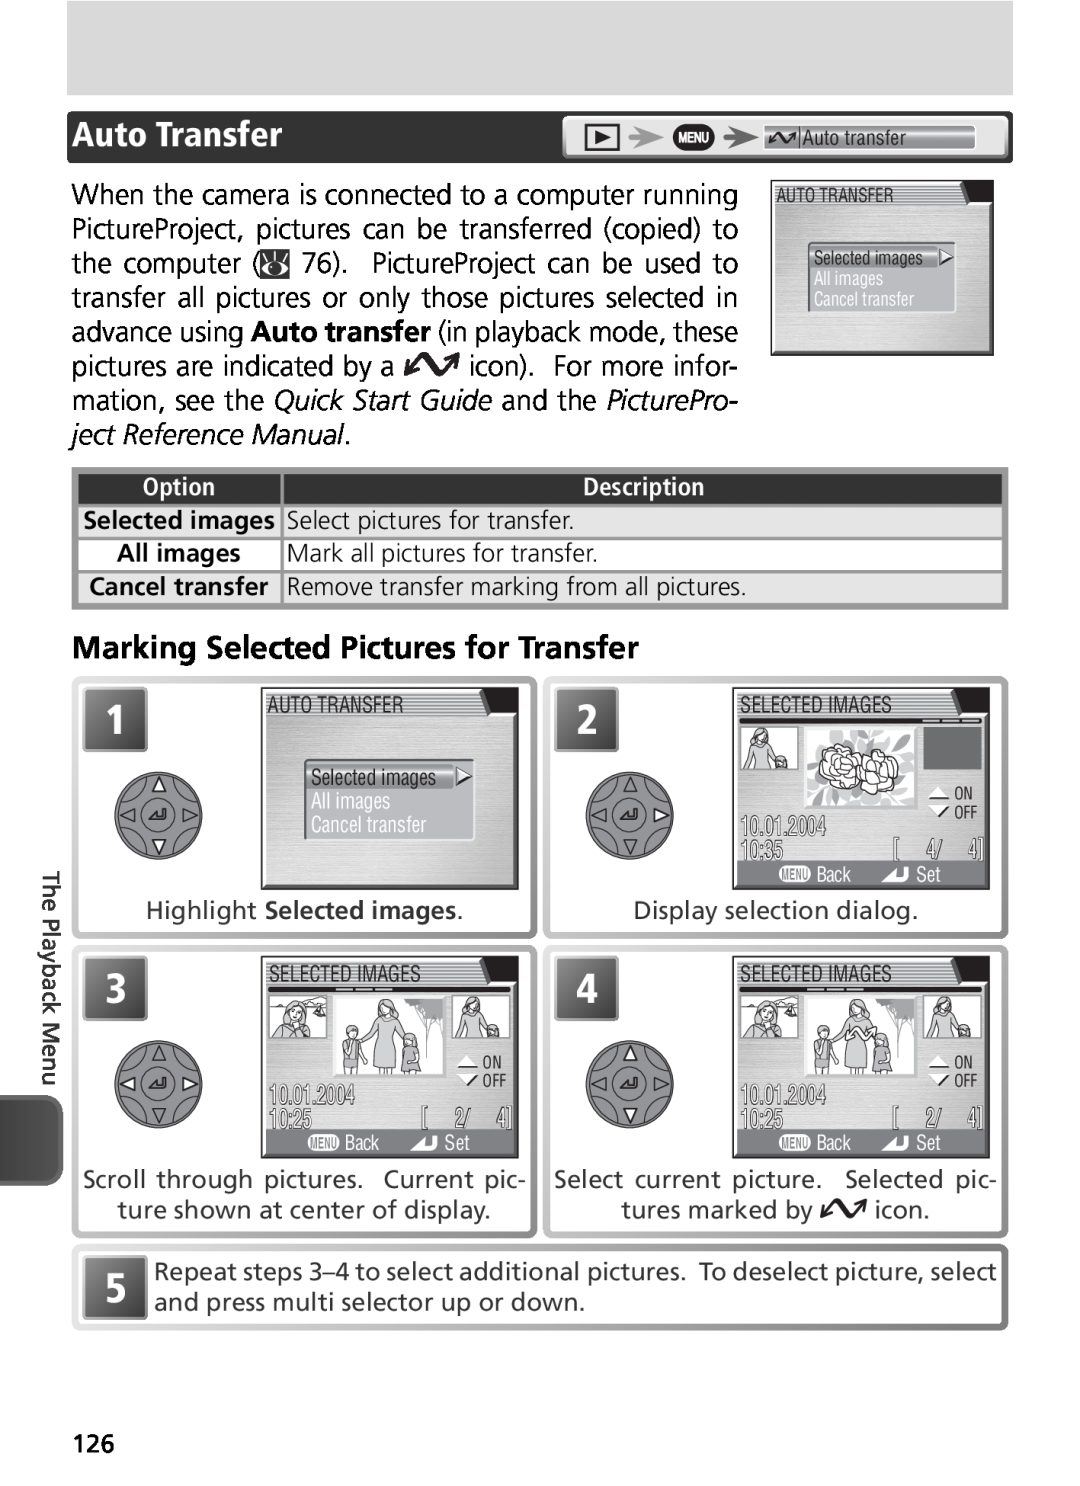 Nikon COOLPIX8800 Auto Transfer, Marking Selected Pictures for Transfer, Highlight Selected images, 10.01.2004, 1025, 1035 